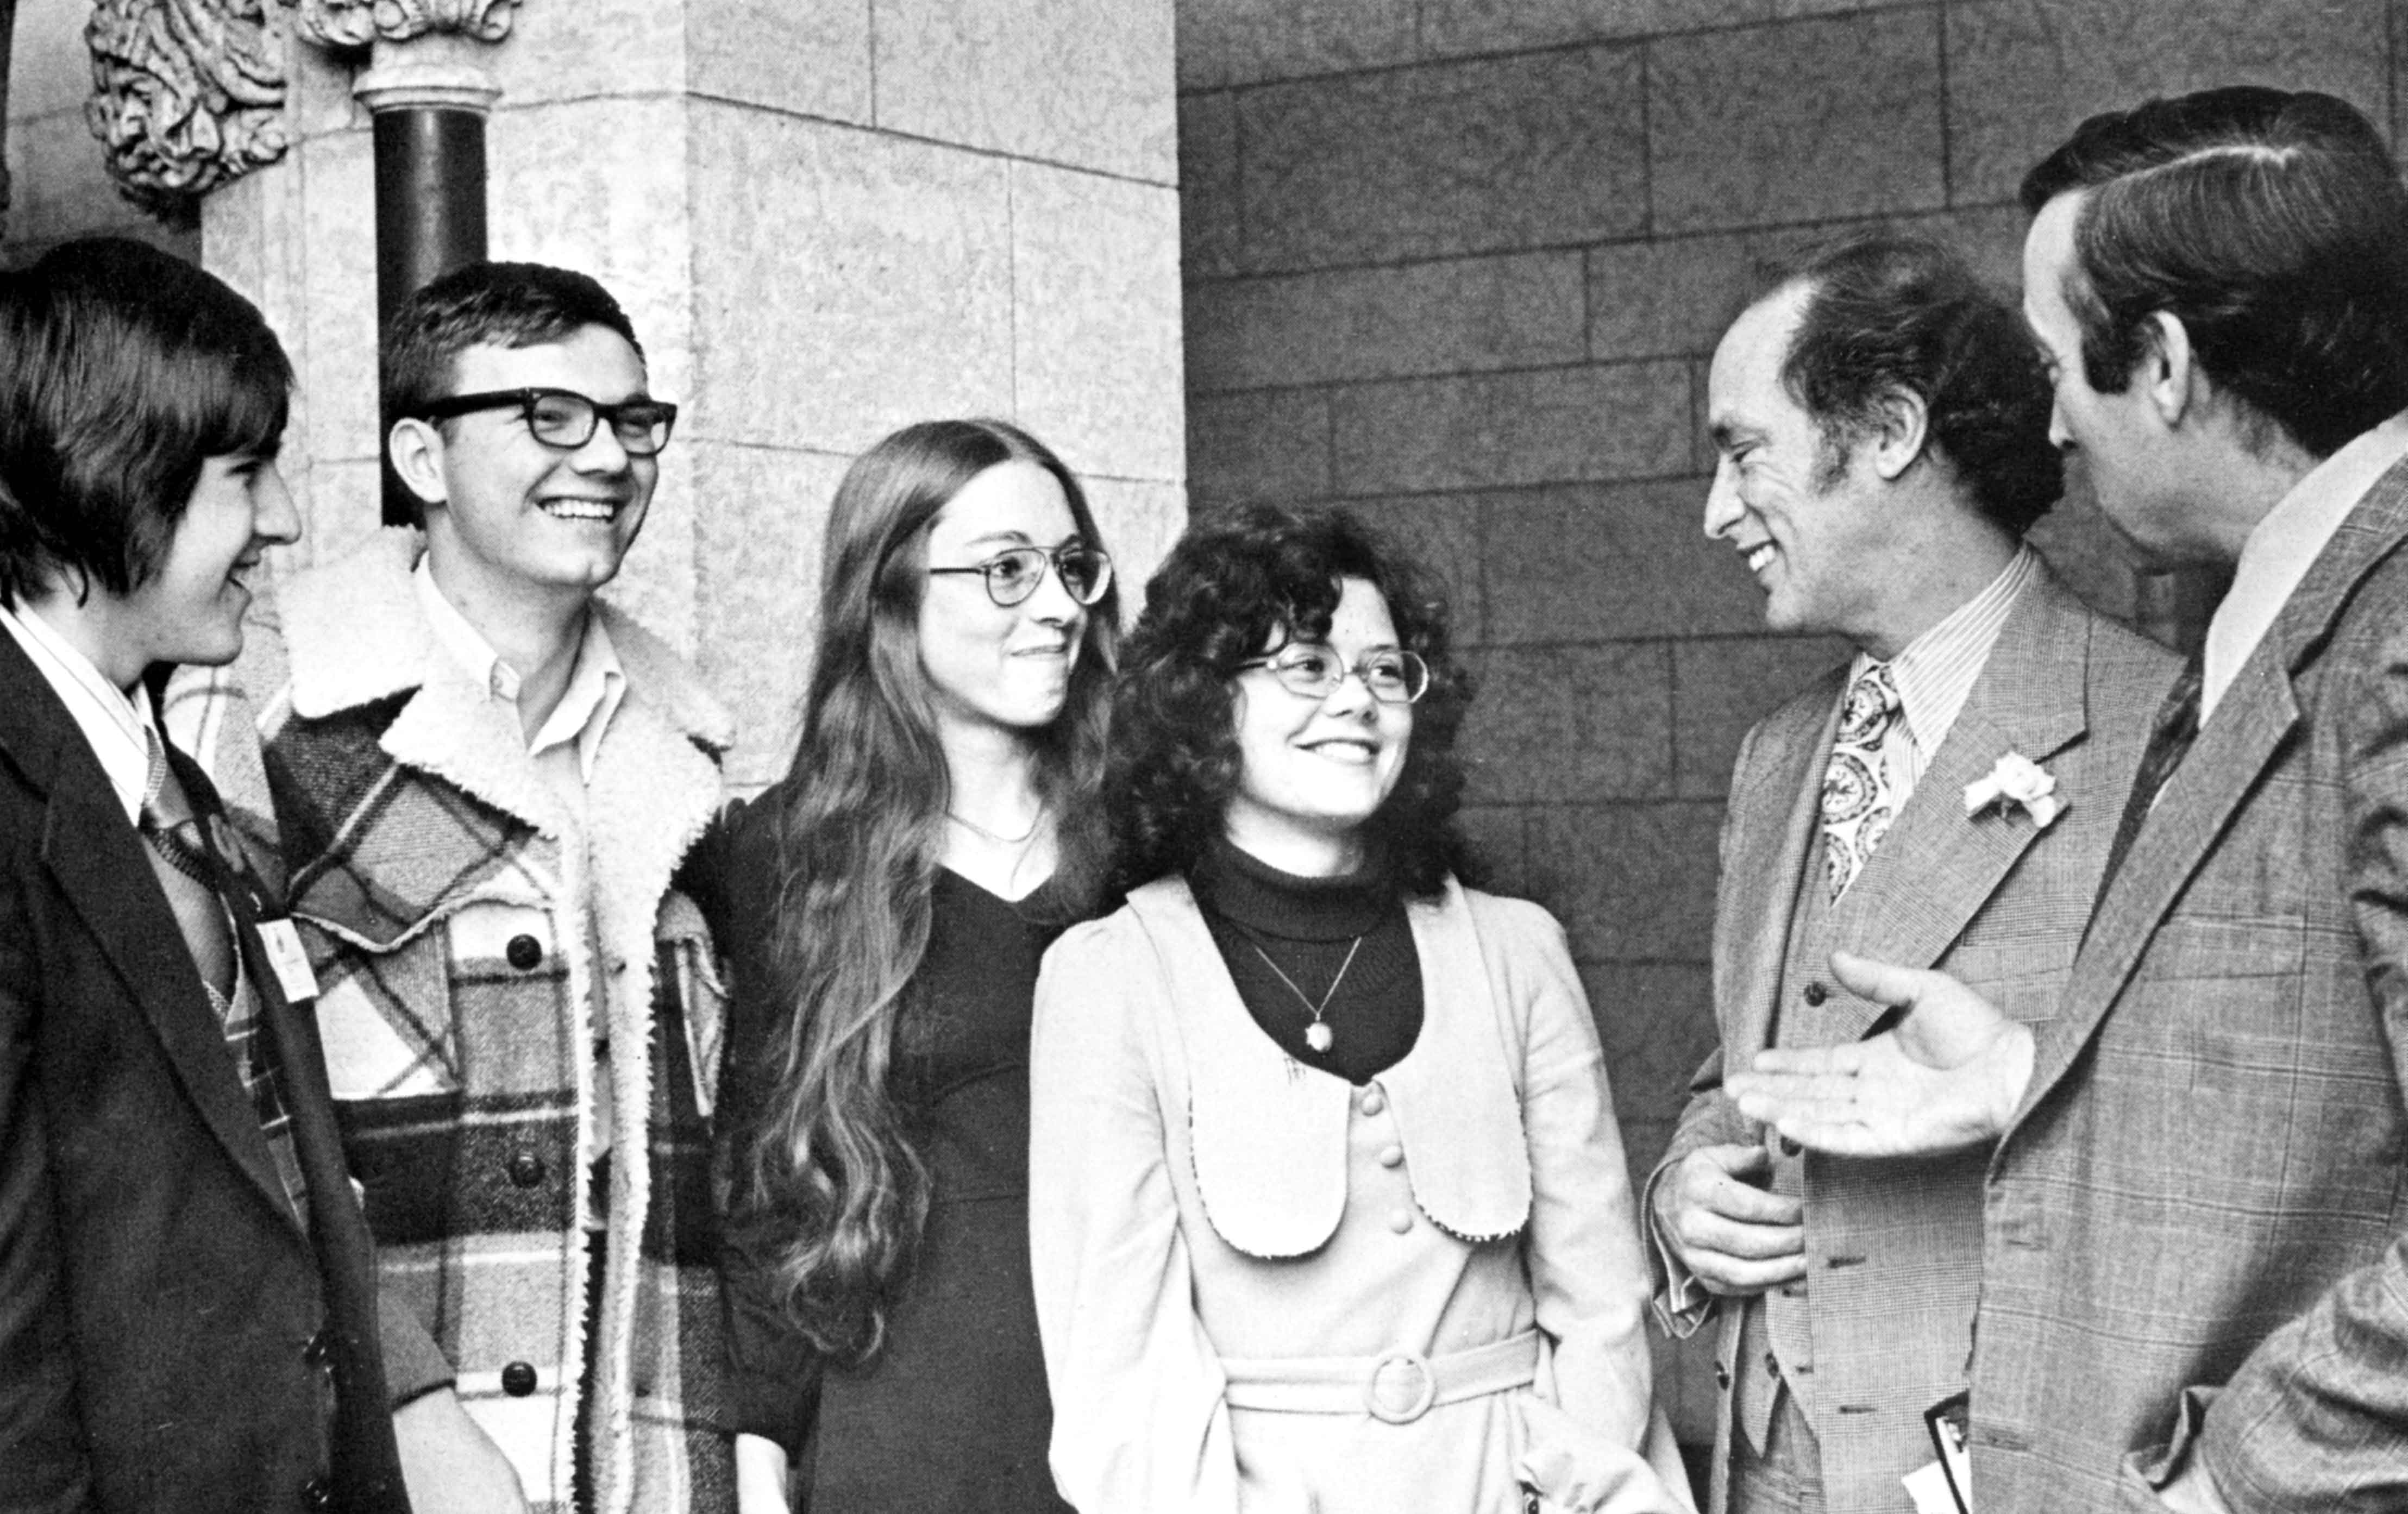 (Click to magnify - multiple levels of magnification) Students: Gordon Dick, Mark Cummings, Patricia Stewart & Joanne Weller; continuing to the right, Pierre E. Trudeau and Uxbridge MP Norm Cafik.